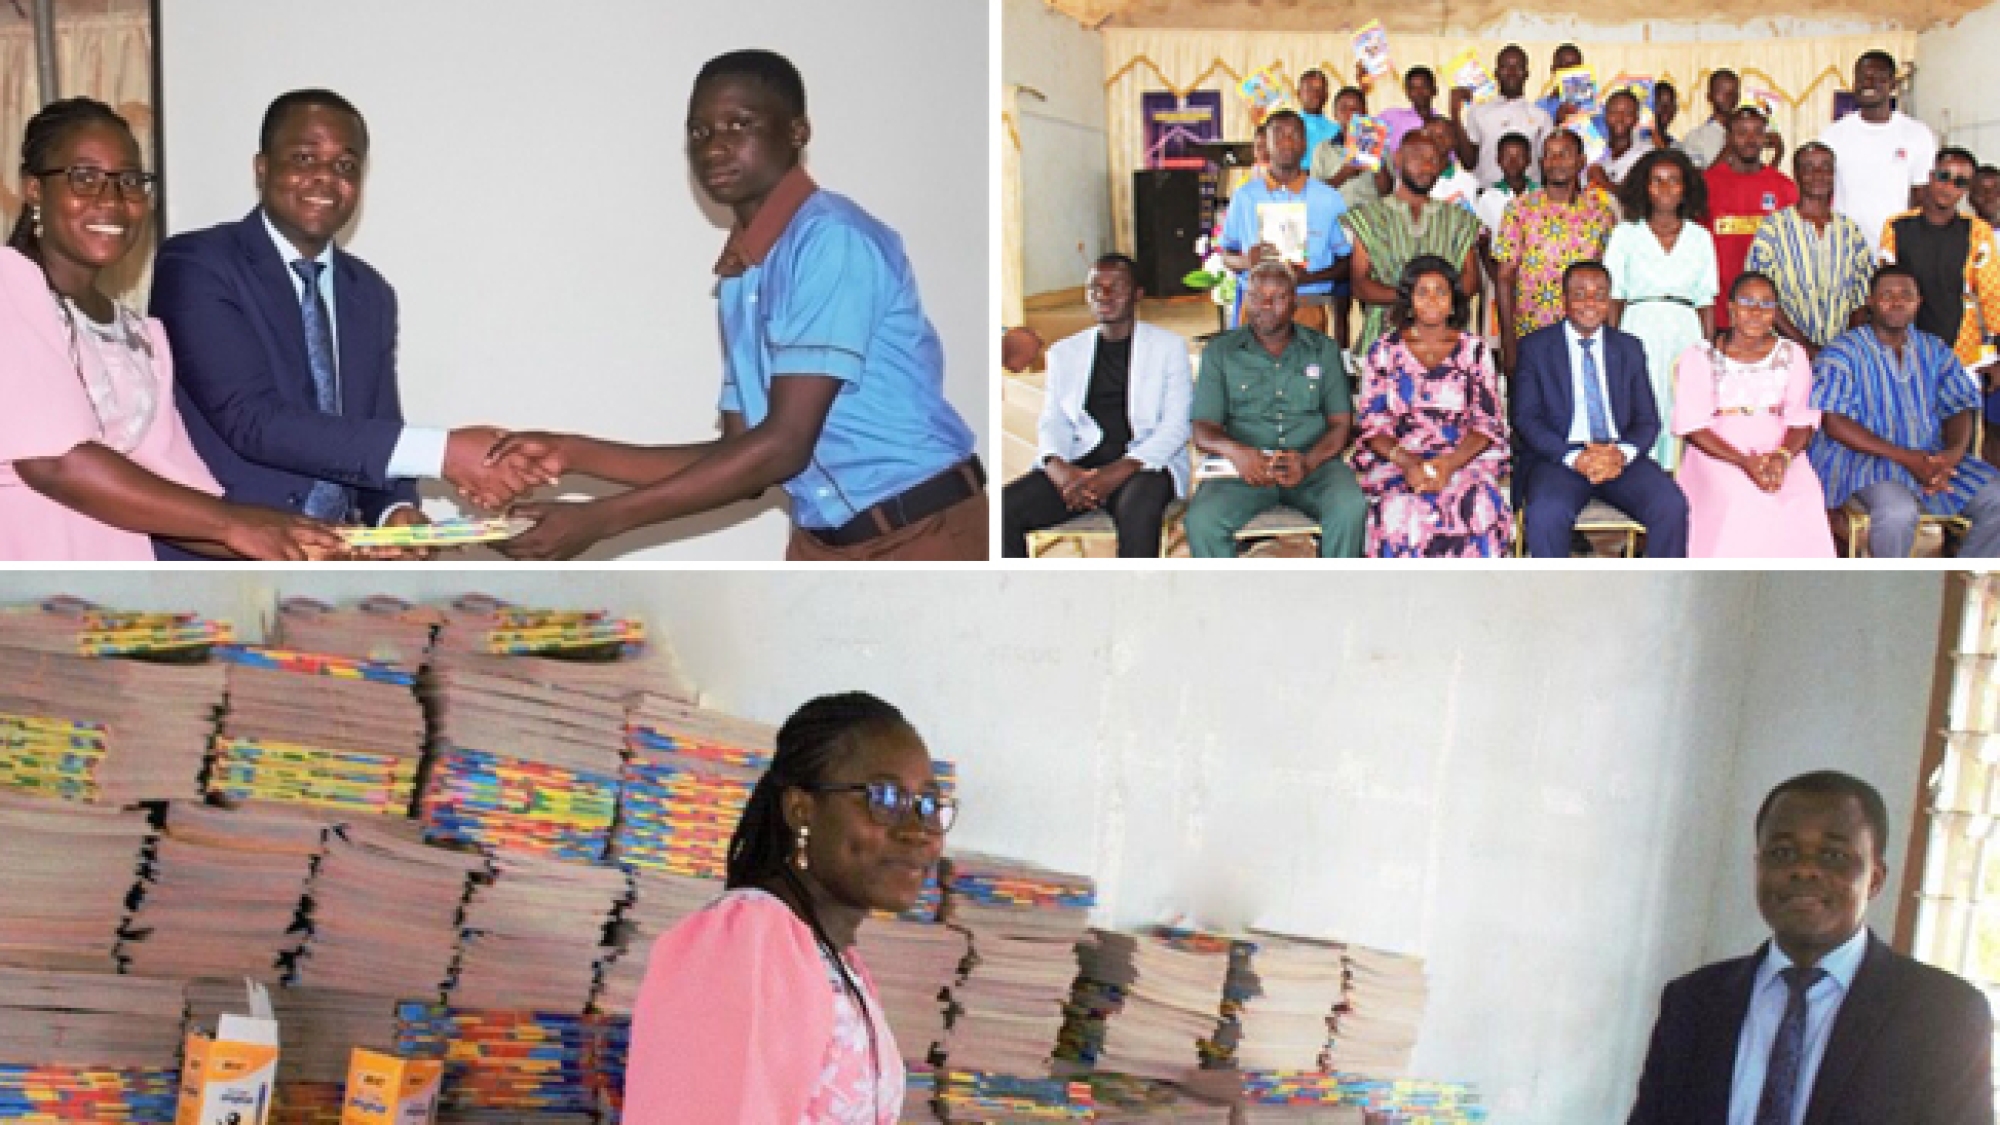 Pastor And His Family Support Students With Educational Materials web